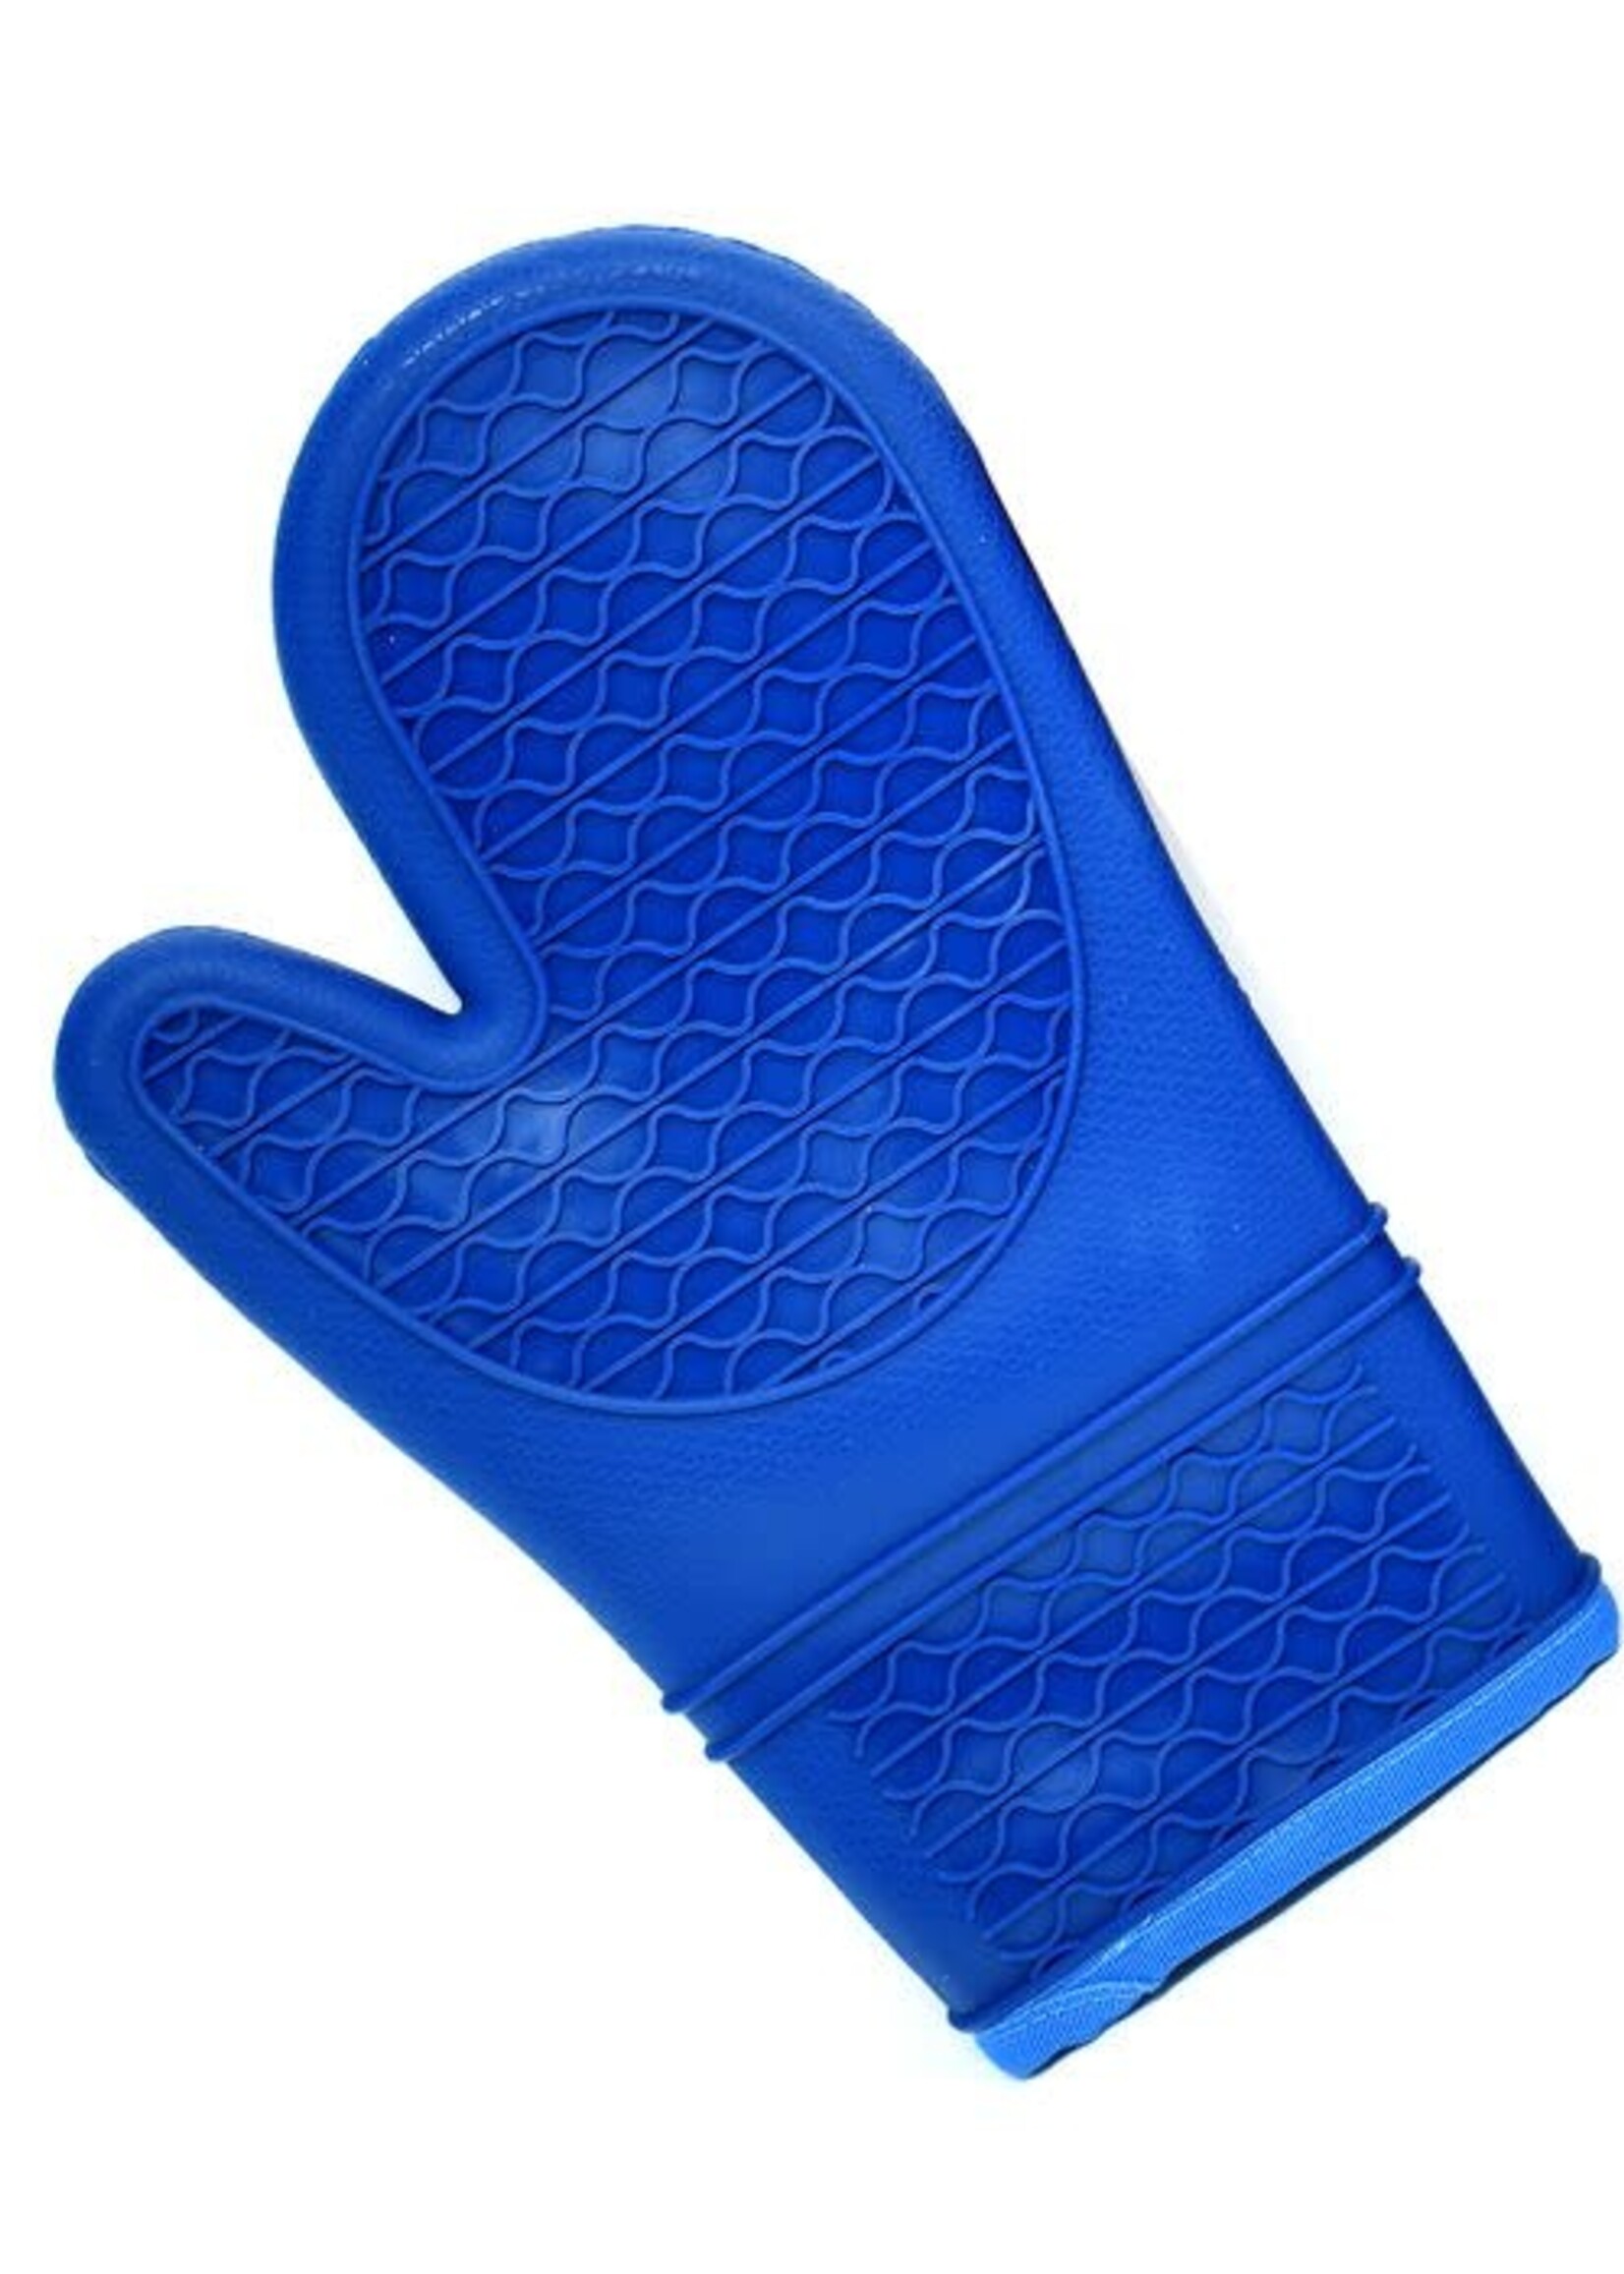 Norpro Silicone/Fabric Glove Blue Large